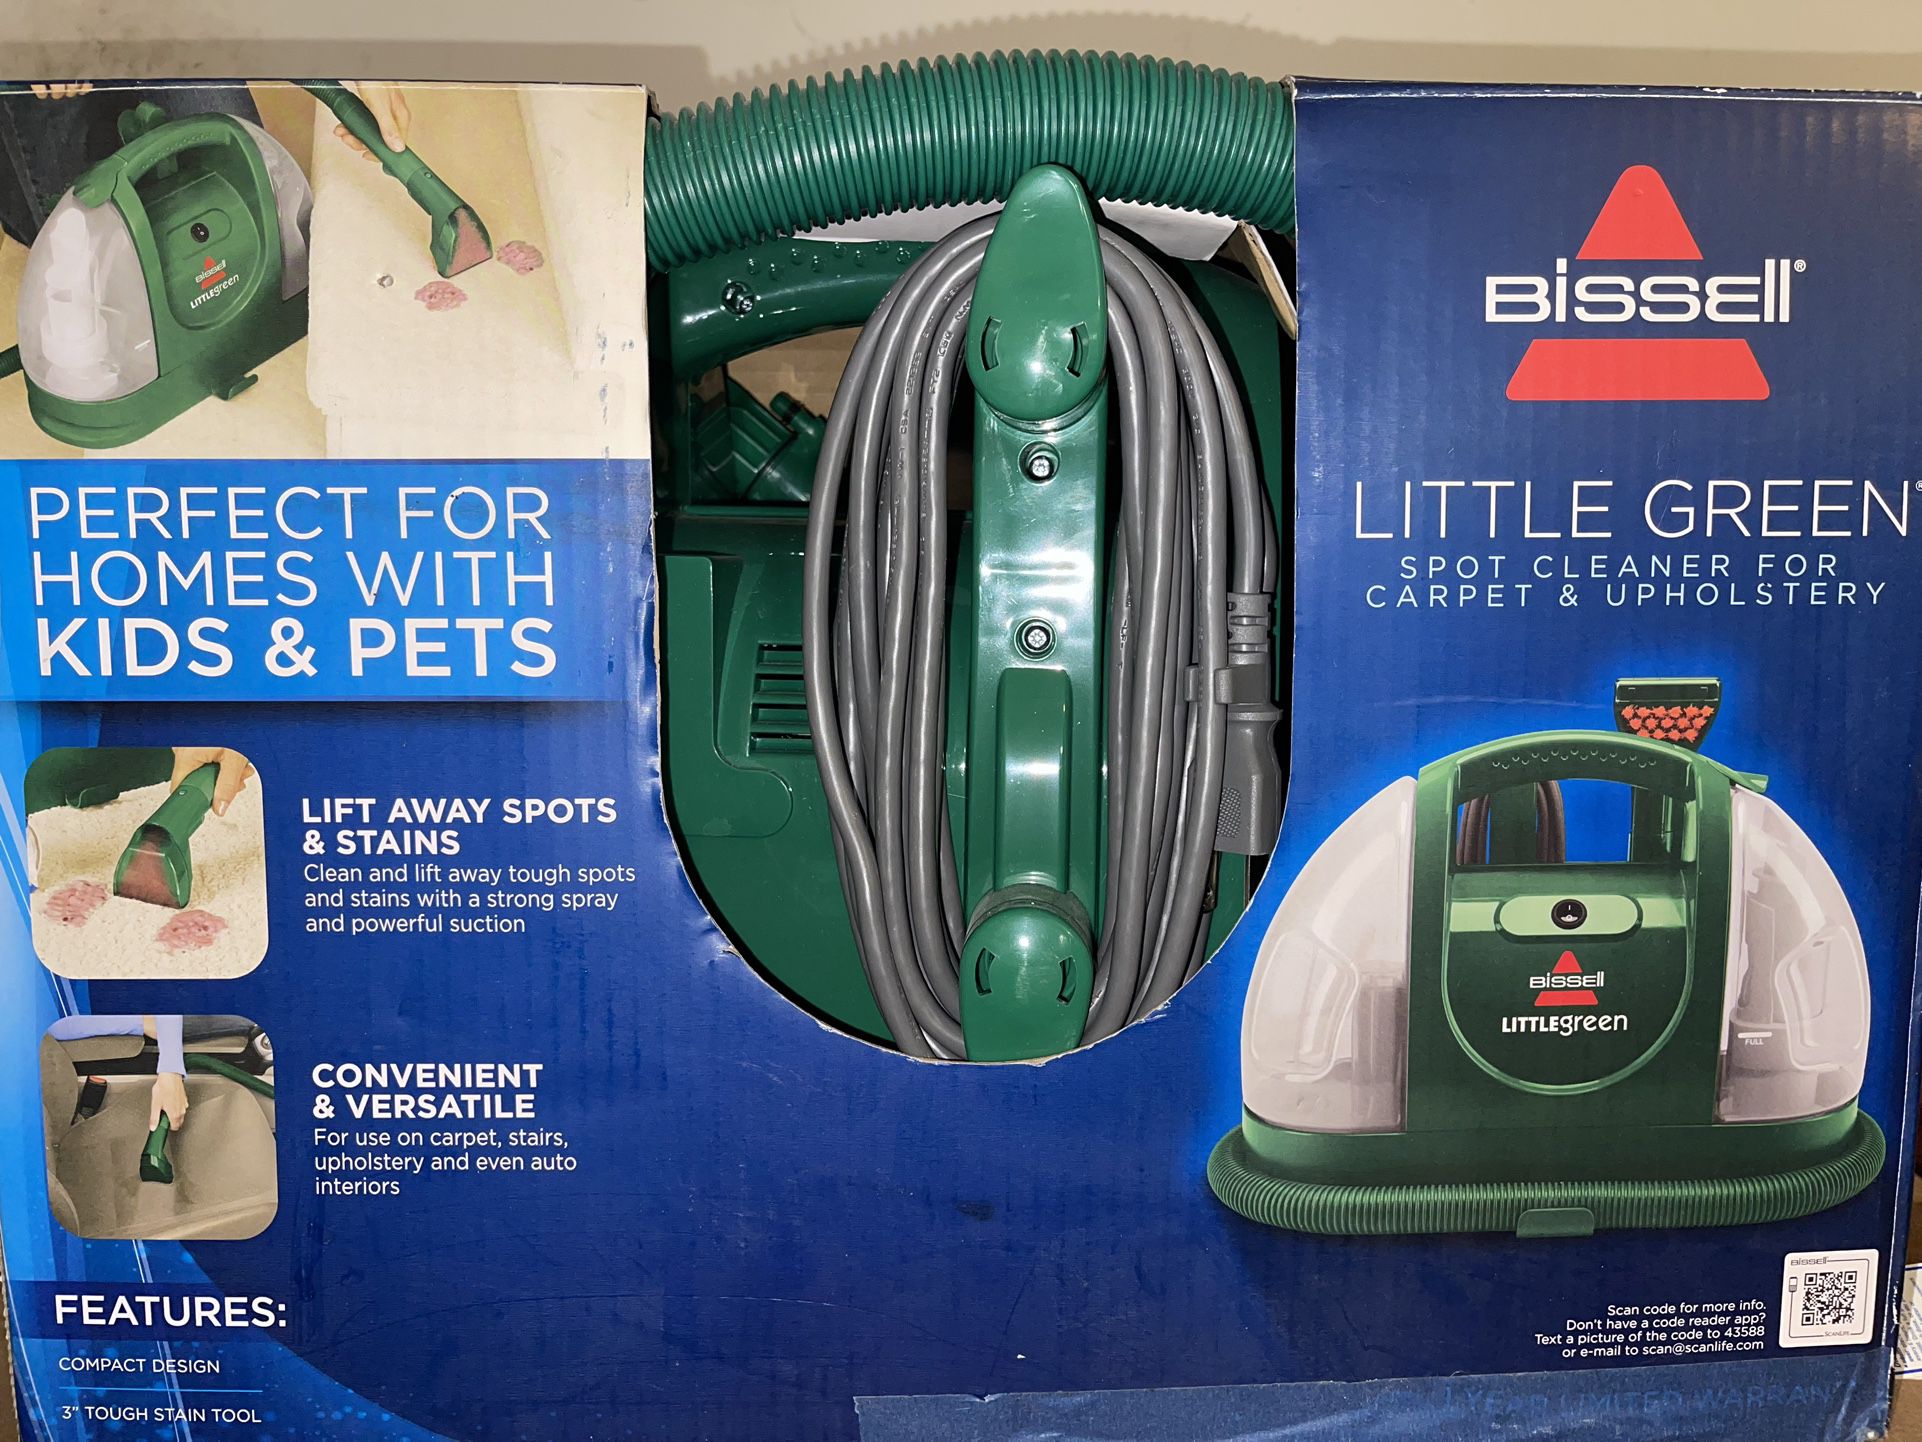 BISSELL  SPOT CLEANER FOR CARPET & UPHOLSTERY